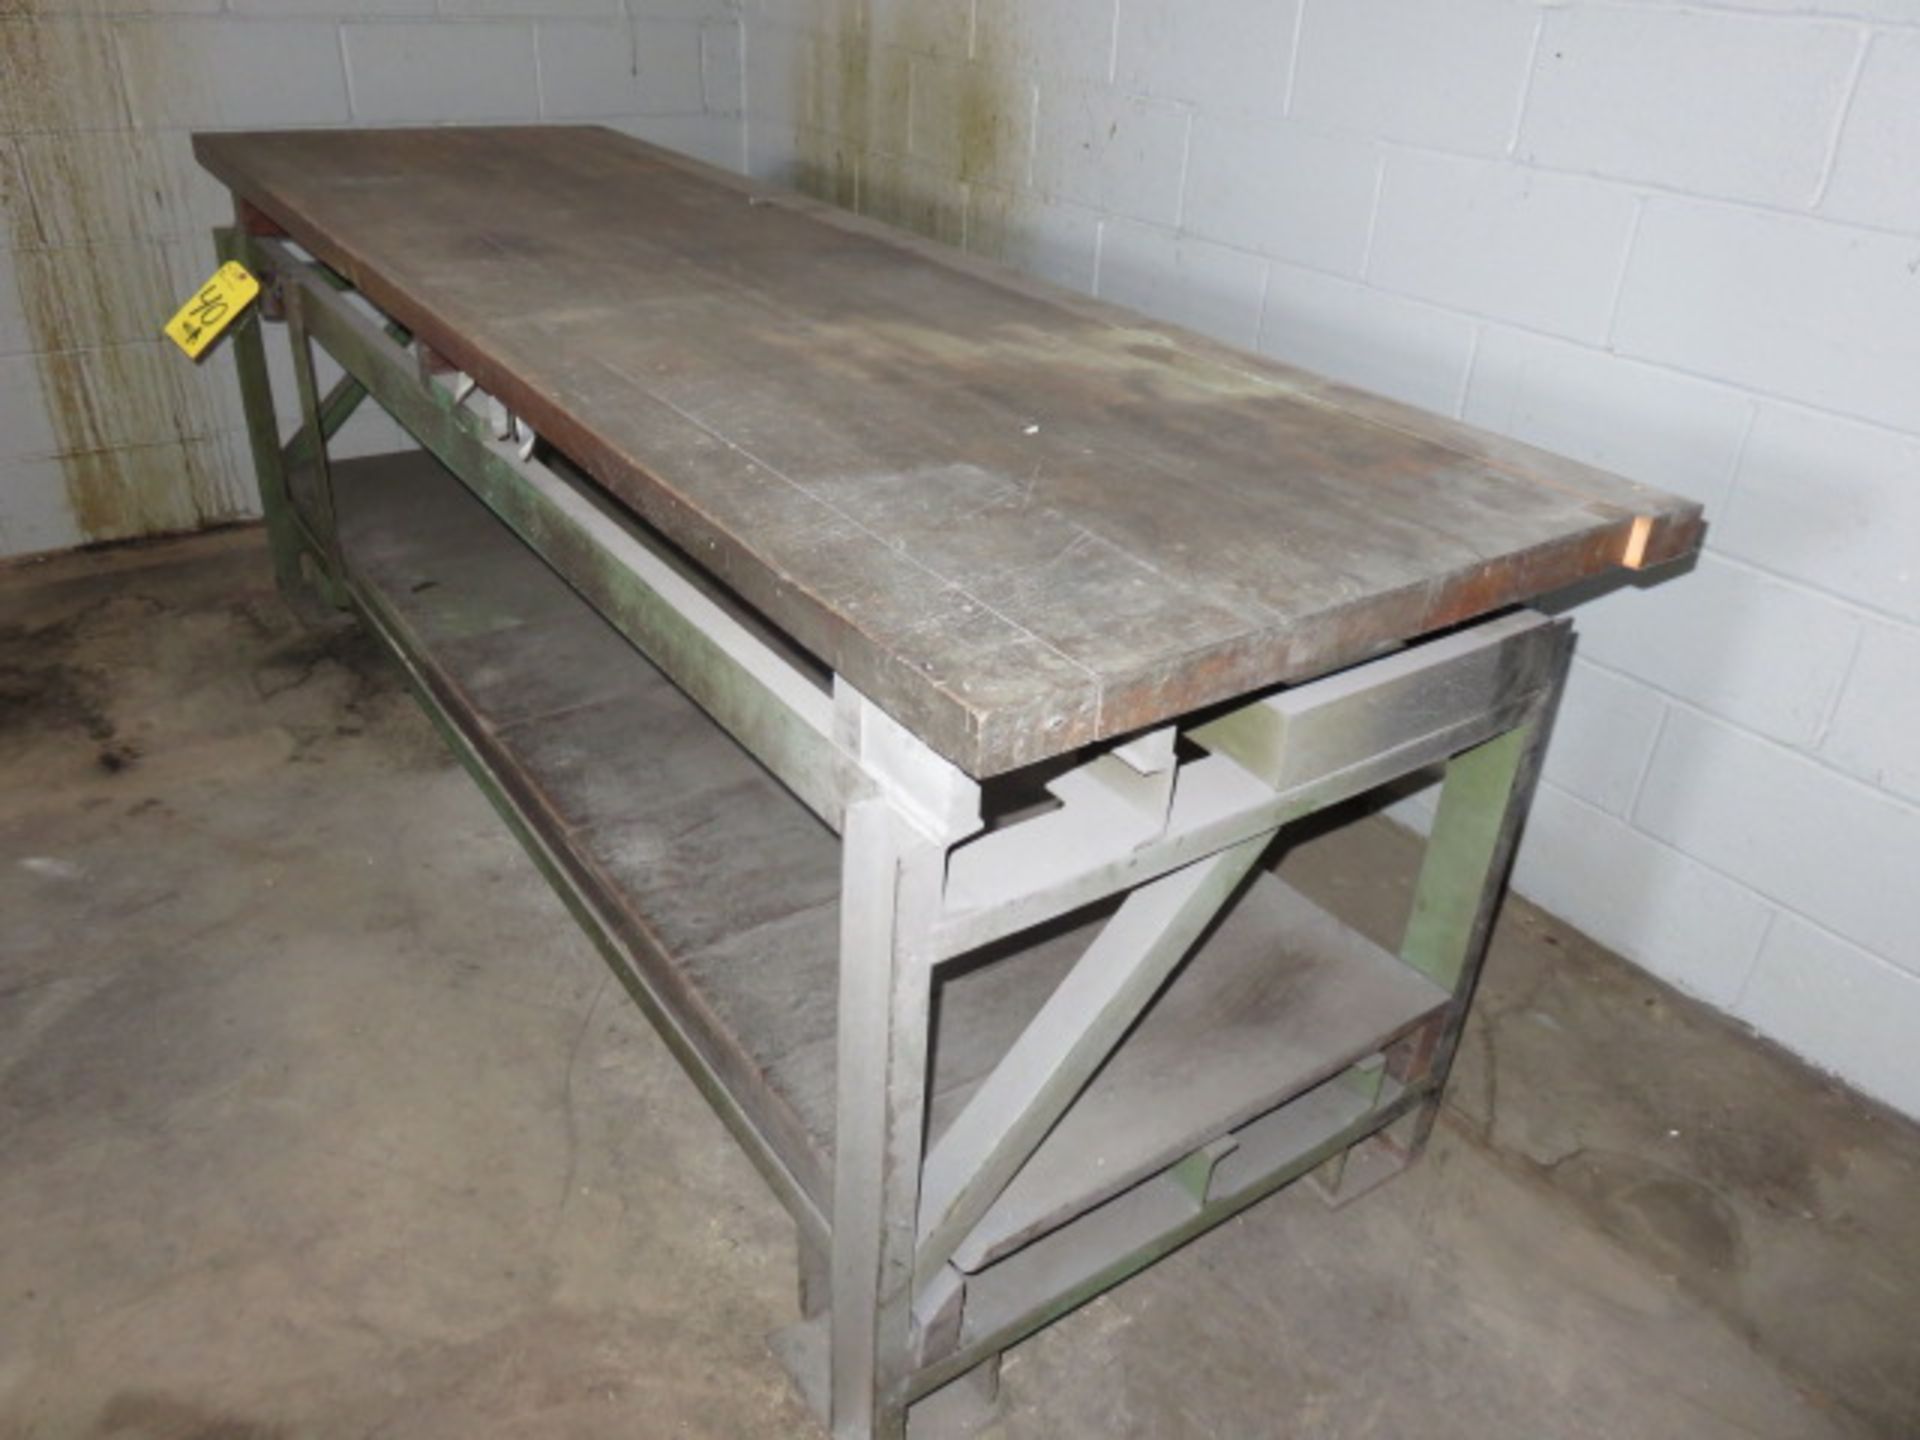 30 IN, X 96 UB, BUTCHER BLOCK BENCH WITH IRON FRAME - Image 2 of 2